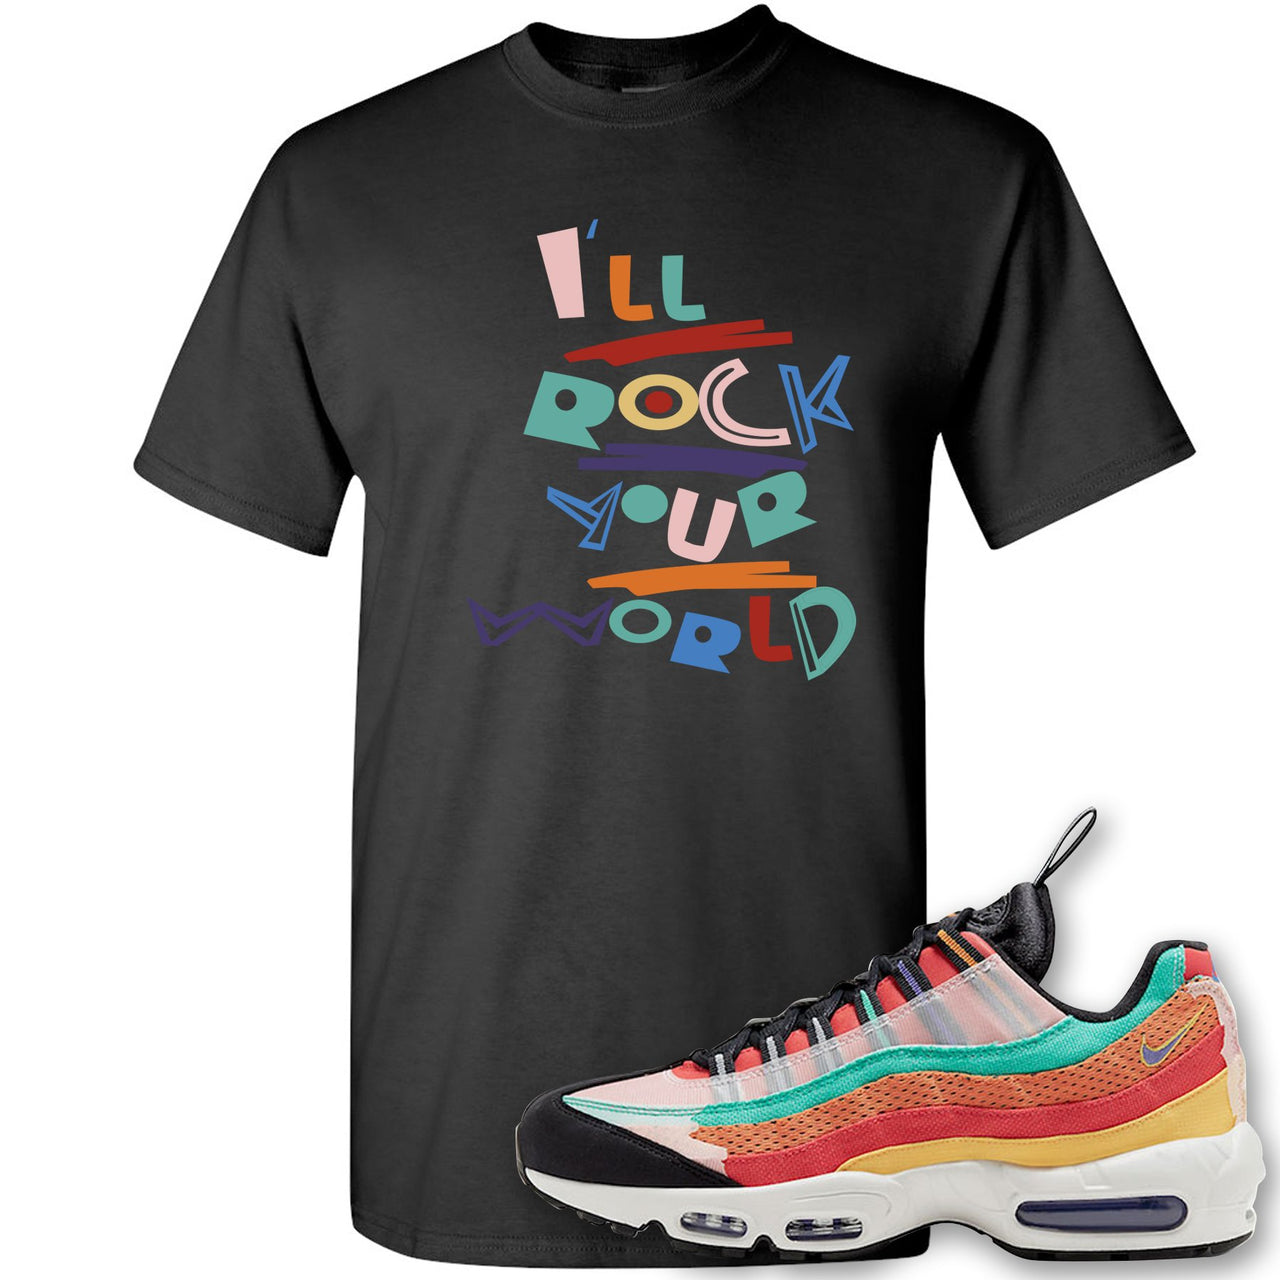 Air Max 95 Black History Month Sneaker Black T Shirt | Tees to match Nike Air Max 95 Black History Month Shoes | I'll Rock Your World